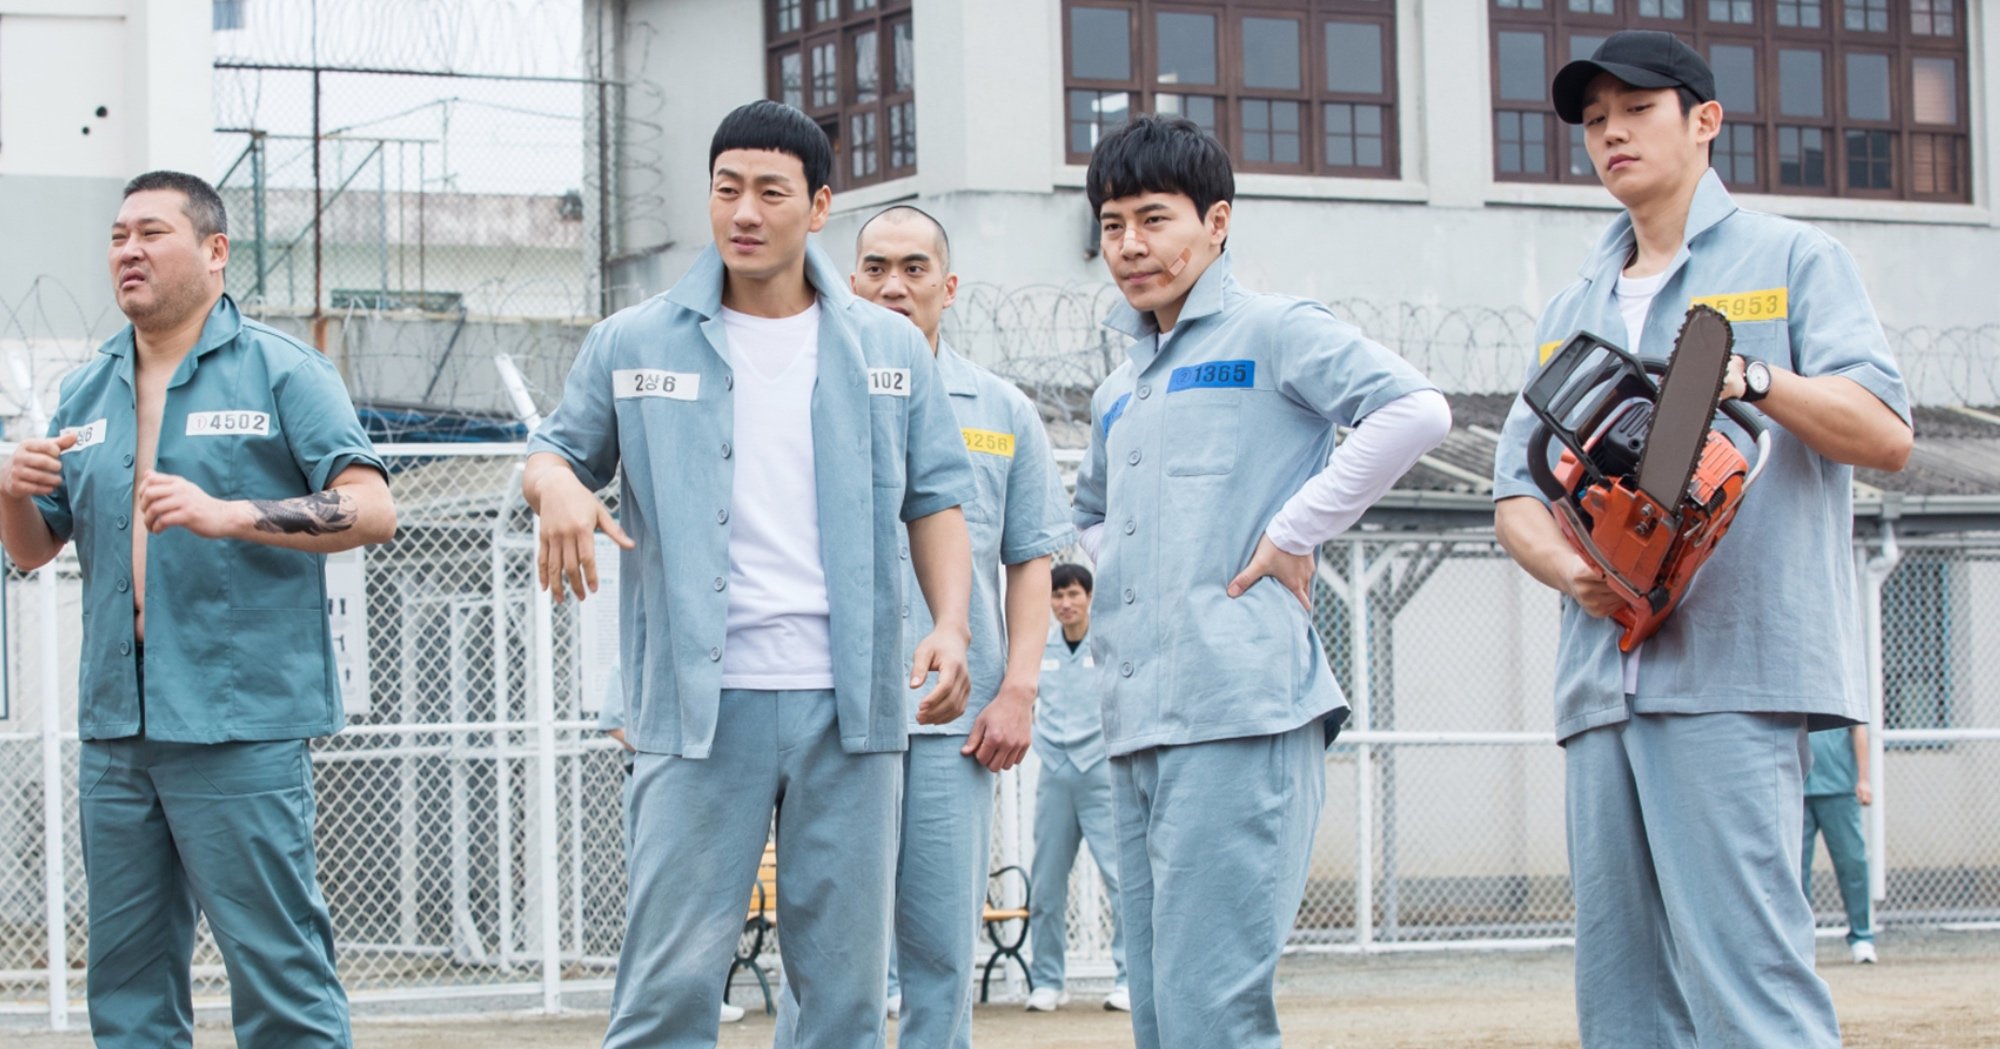 'Prison Playbook' heartwarming K-drama for the holidays with inmates wearing blue uniforms.